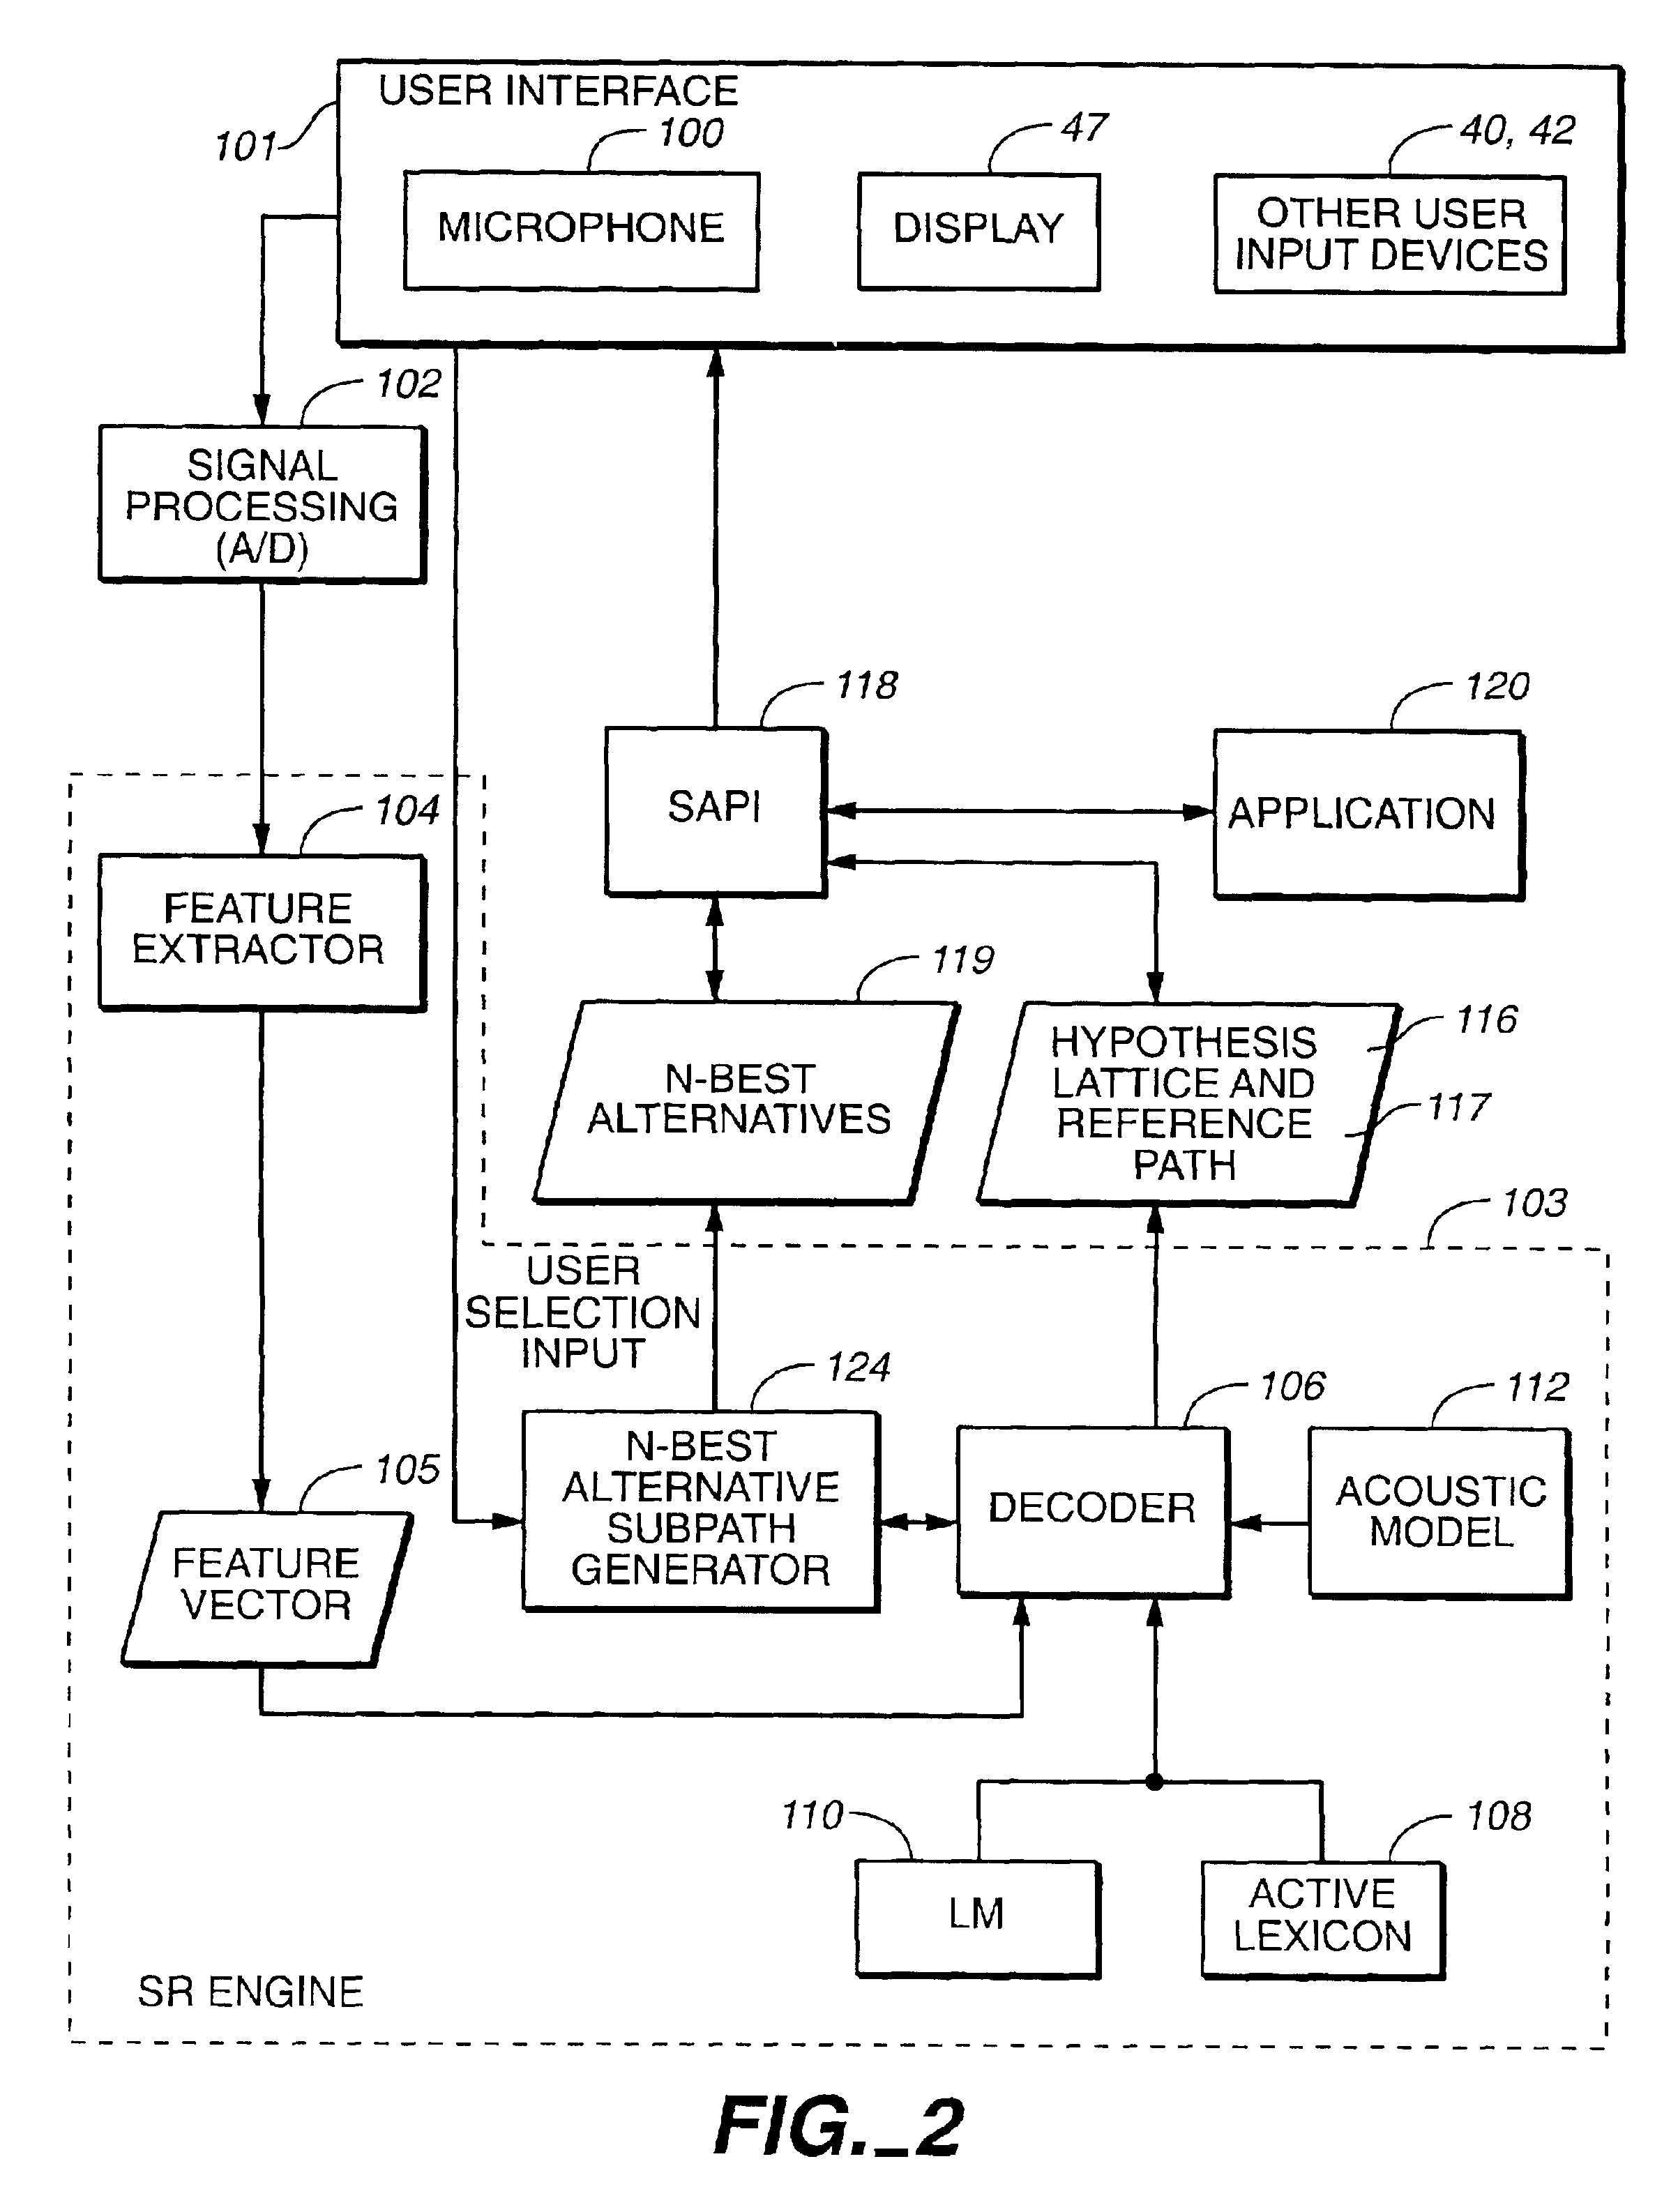 Method and apparatus for generating and displaying N-best alternatives in a speech recognition system